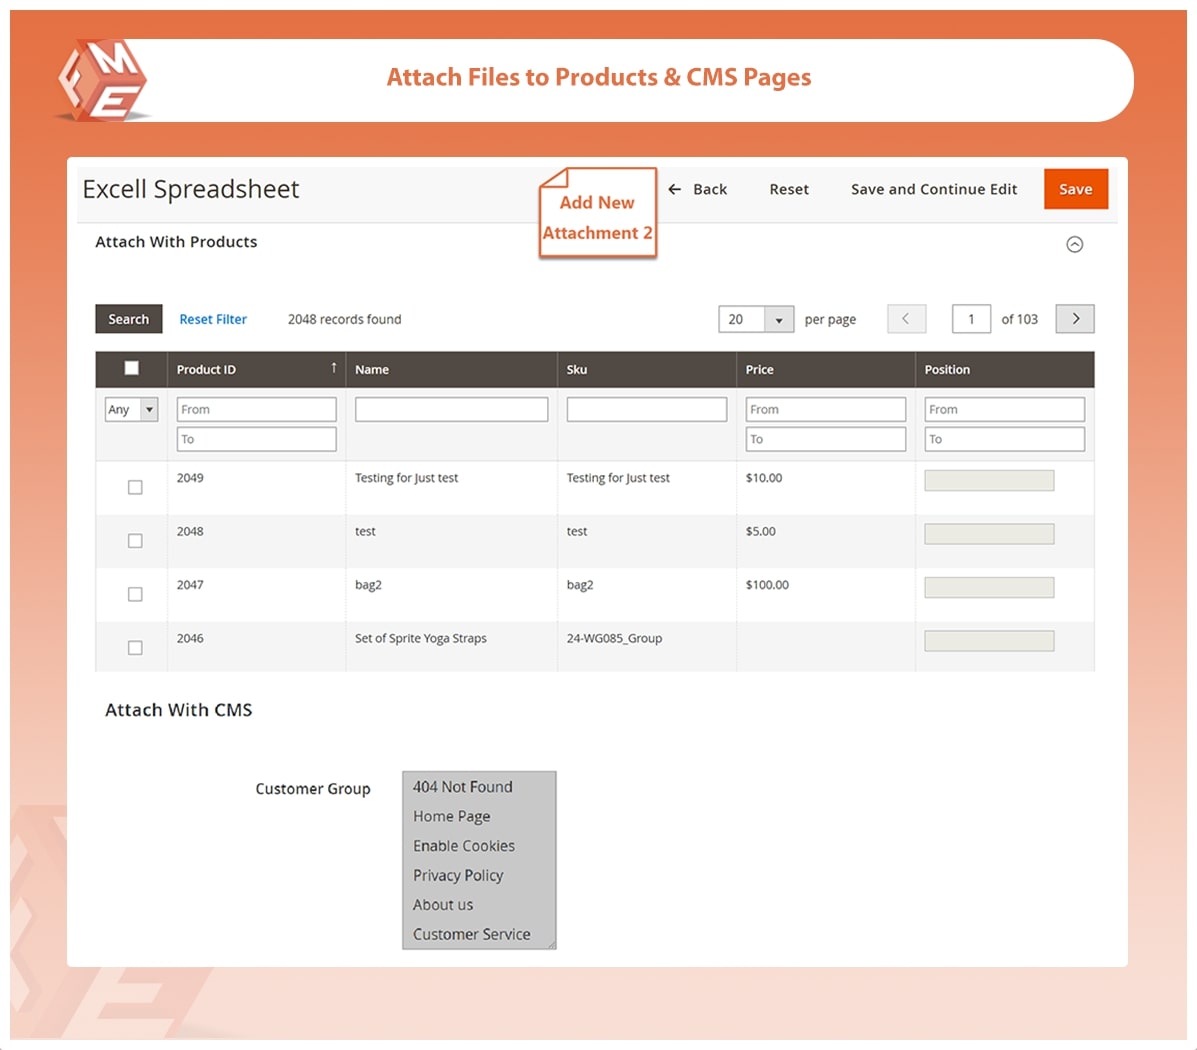 Attach to Product & CMS Pages